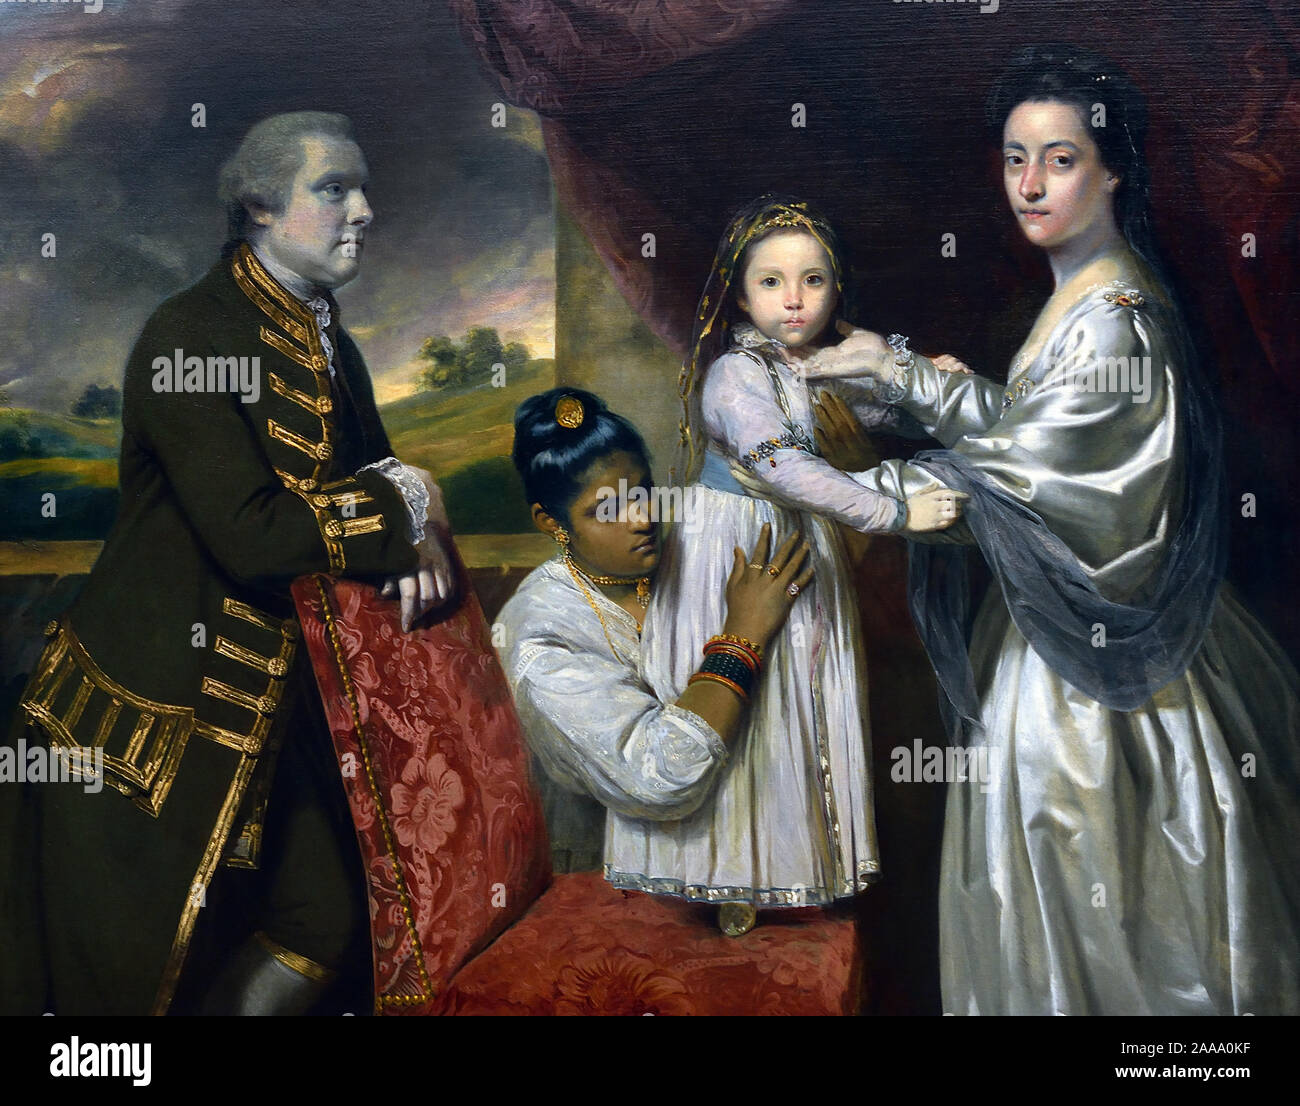 Georg Clive 17620-1779 and his family with an Indian servant 1765-1766 Sir Joshua Reynolds 1723-1792 United Kingdom, England, English, British, Britain, Stock Photo